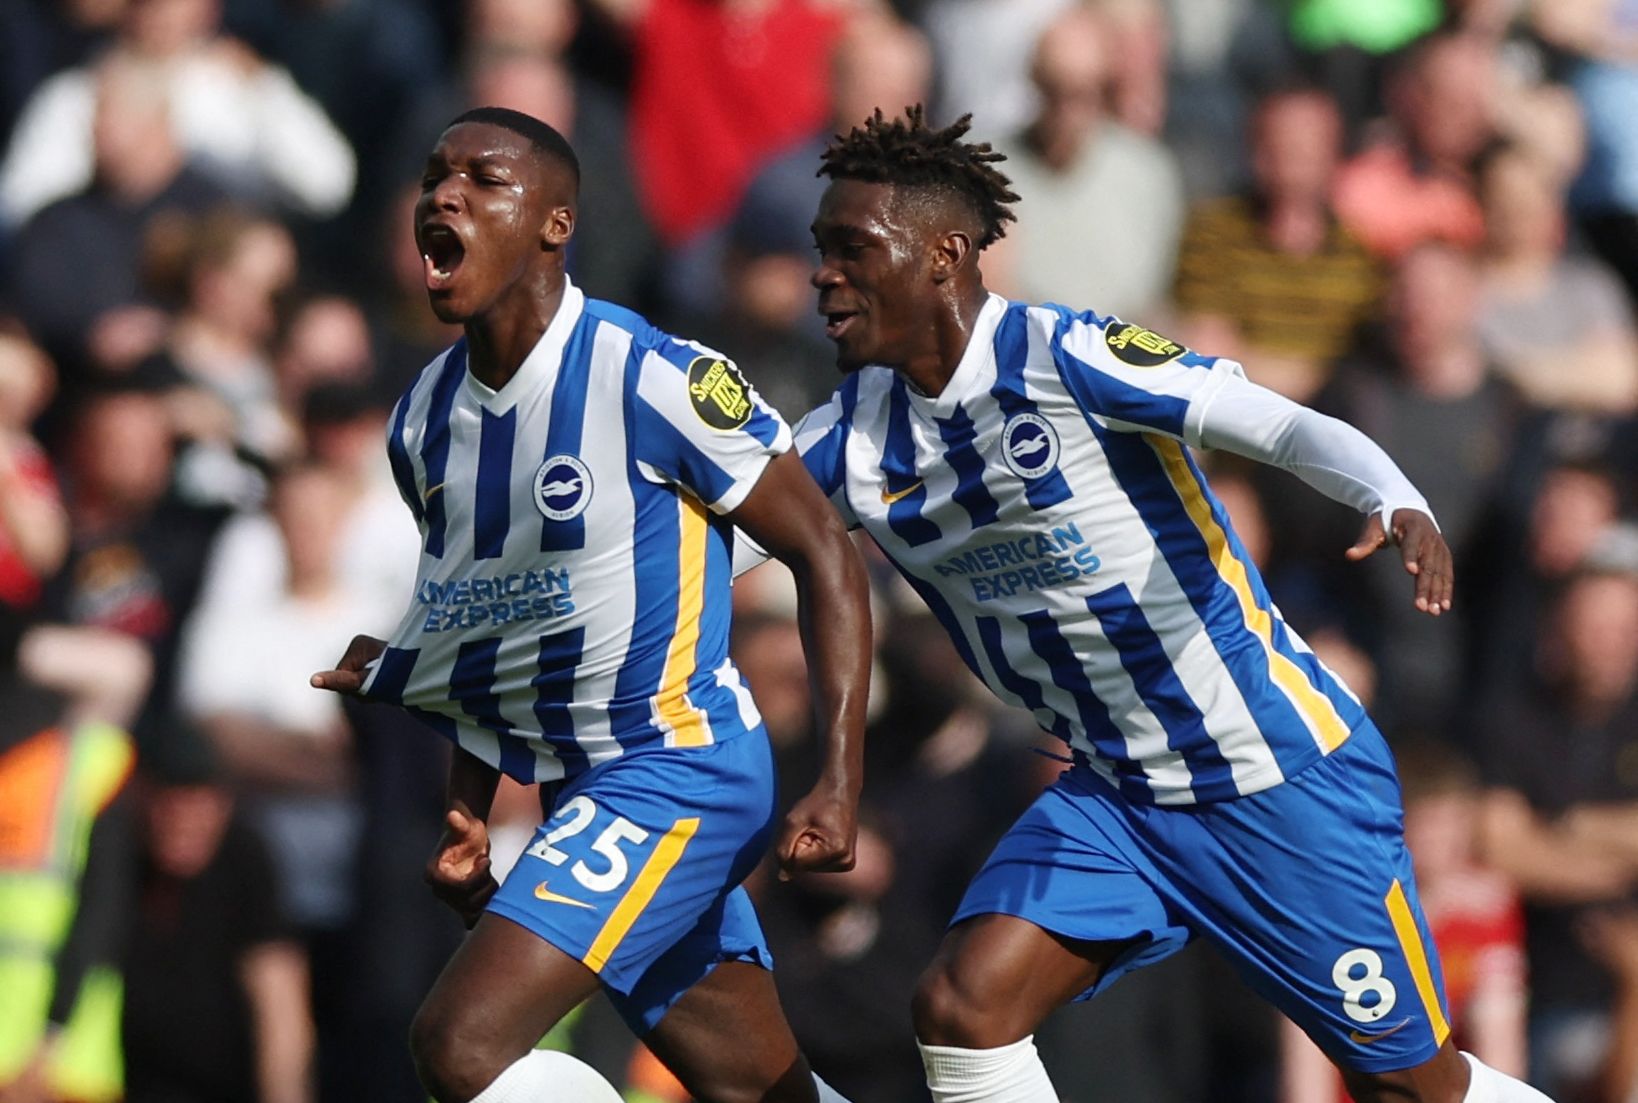 Brighton beat Manchester United 4-0 in the Premier League